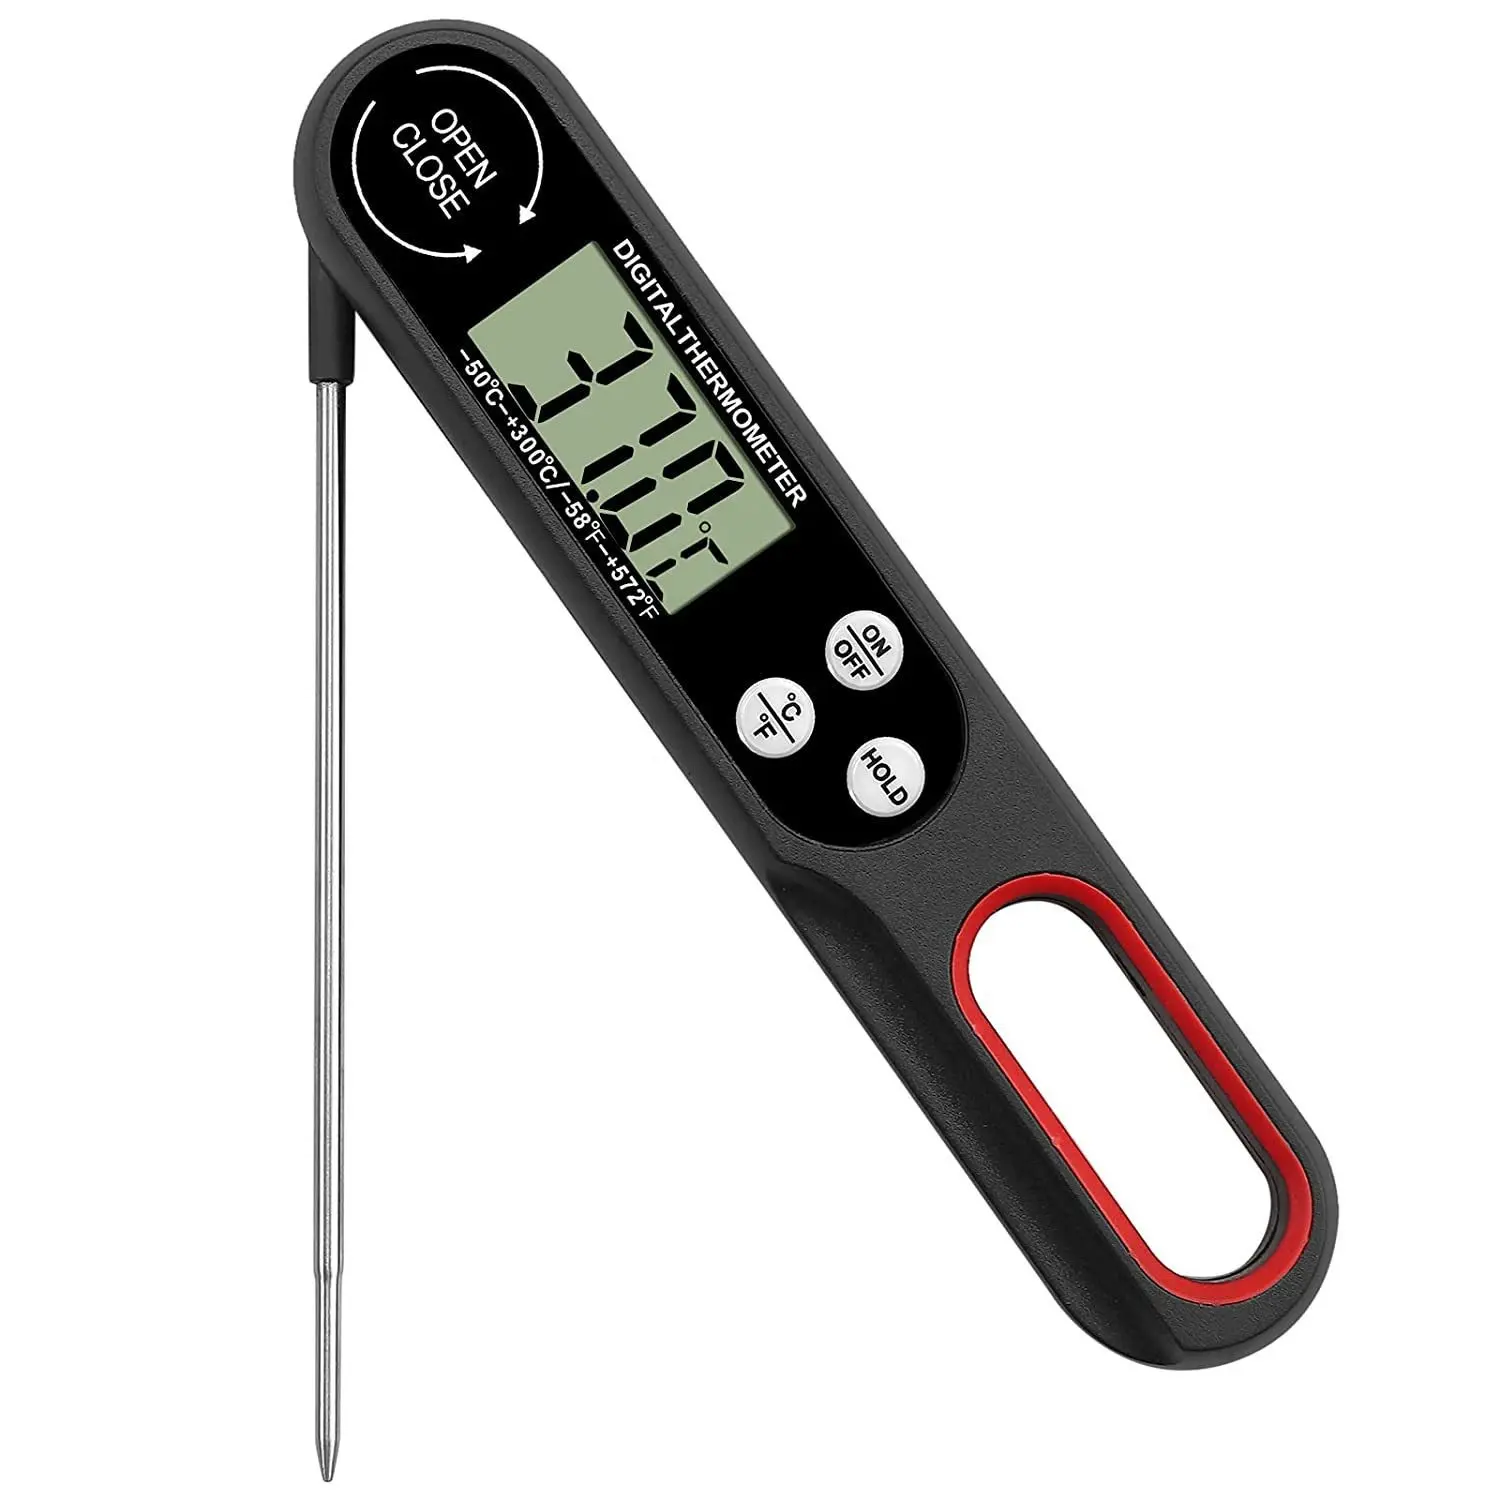 Digital Meat Electronic food thermometer probe folding barbecue thermometer for Kitchen BBQ Water Milk Oil Liquid B1008